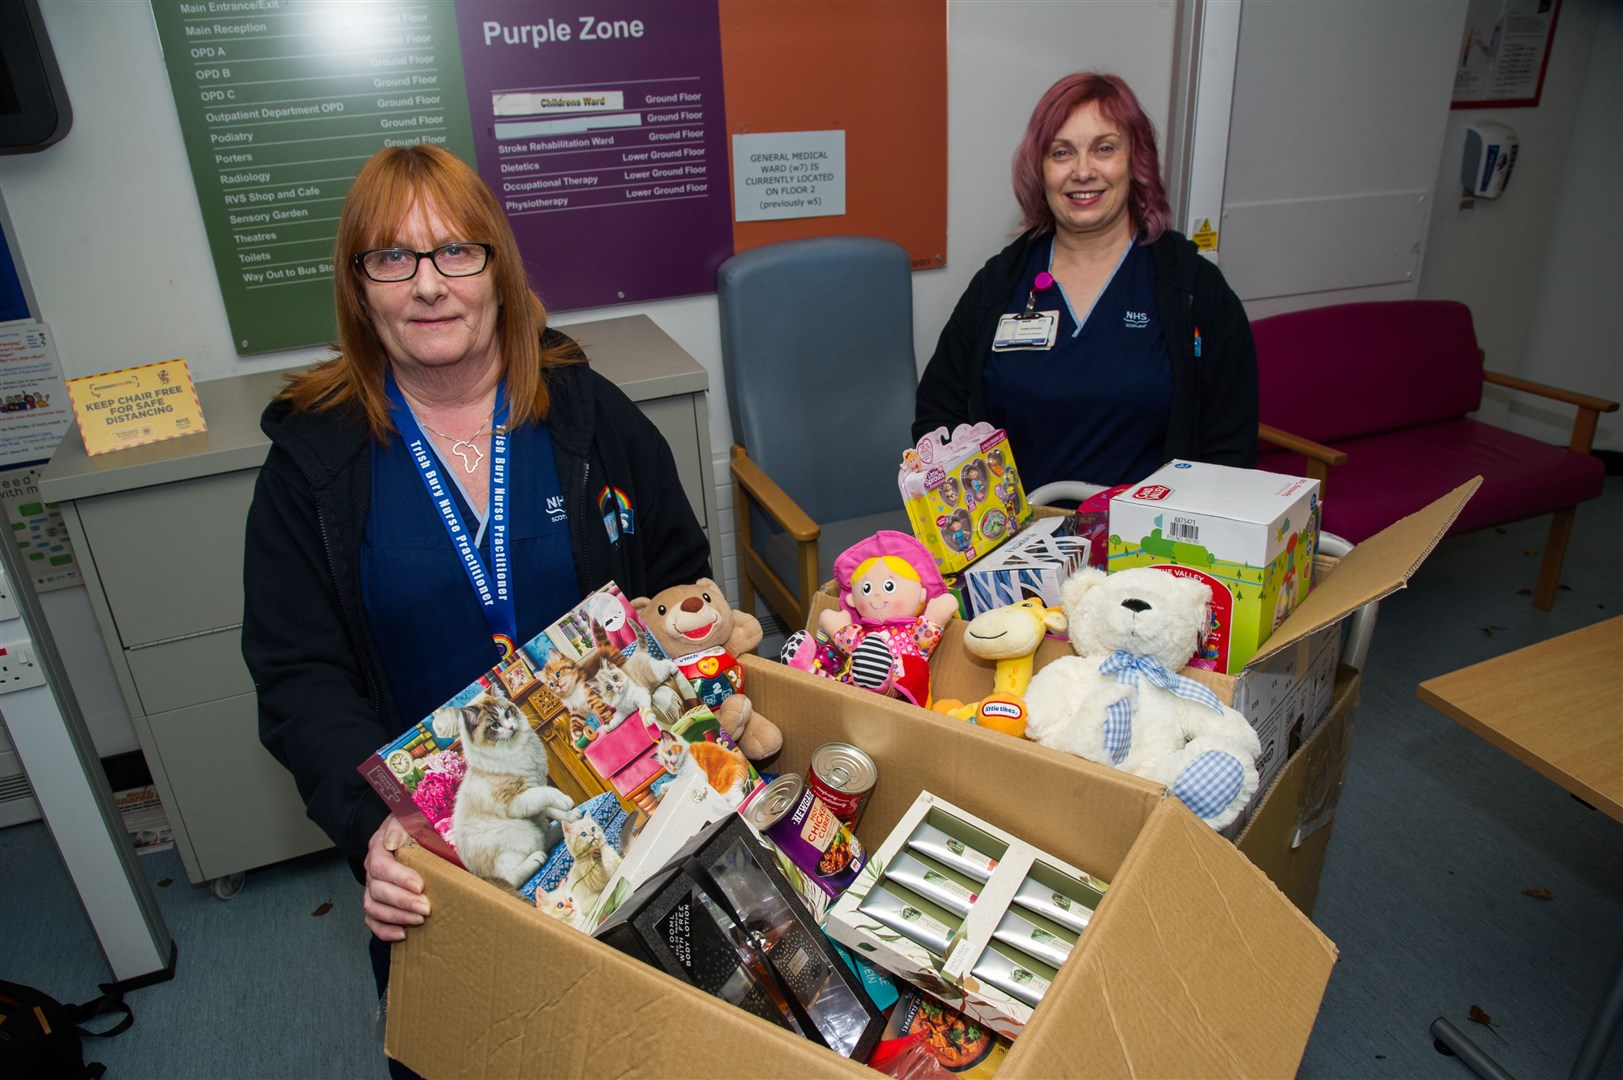 Trish Bury and Karin Howard from the nursing team at Dr Gray's with toys which were donated and safely collected before this latest incident.